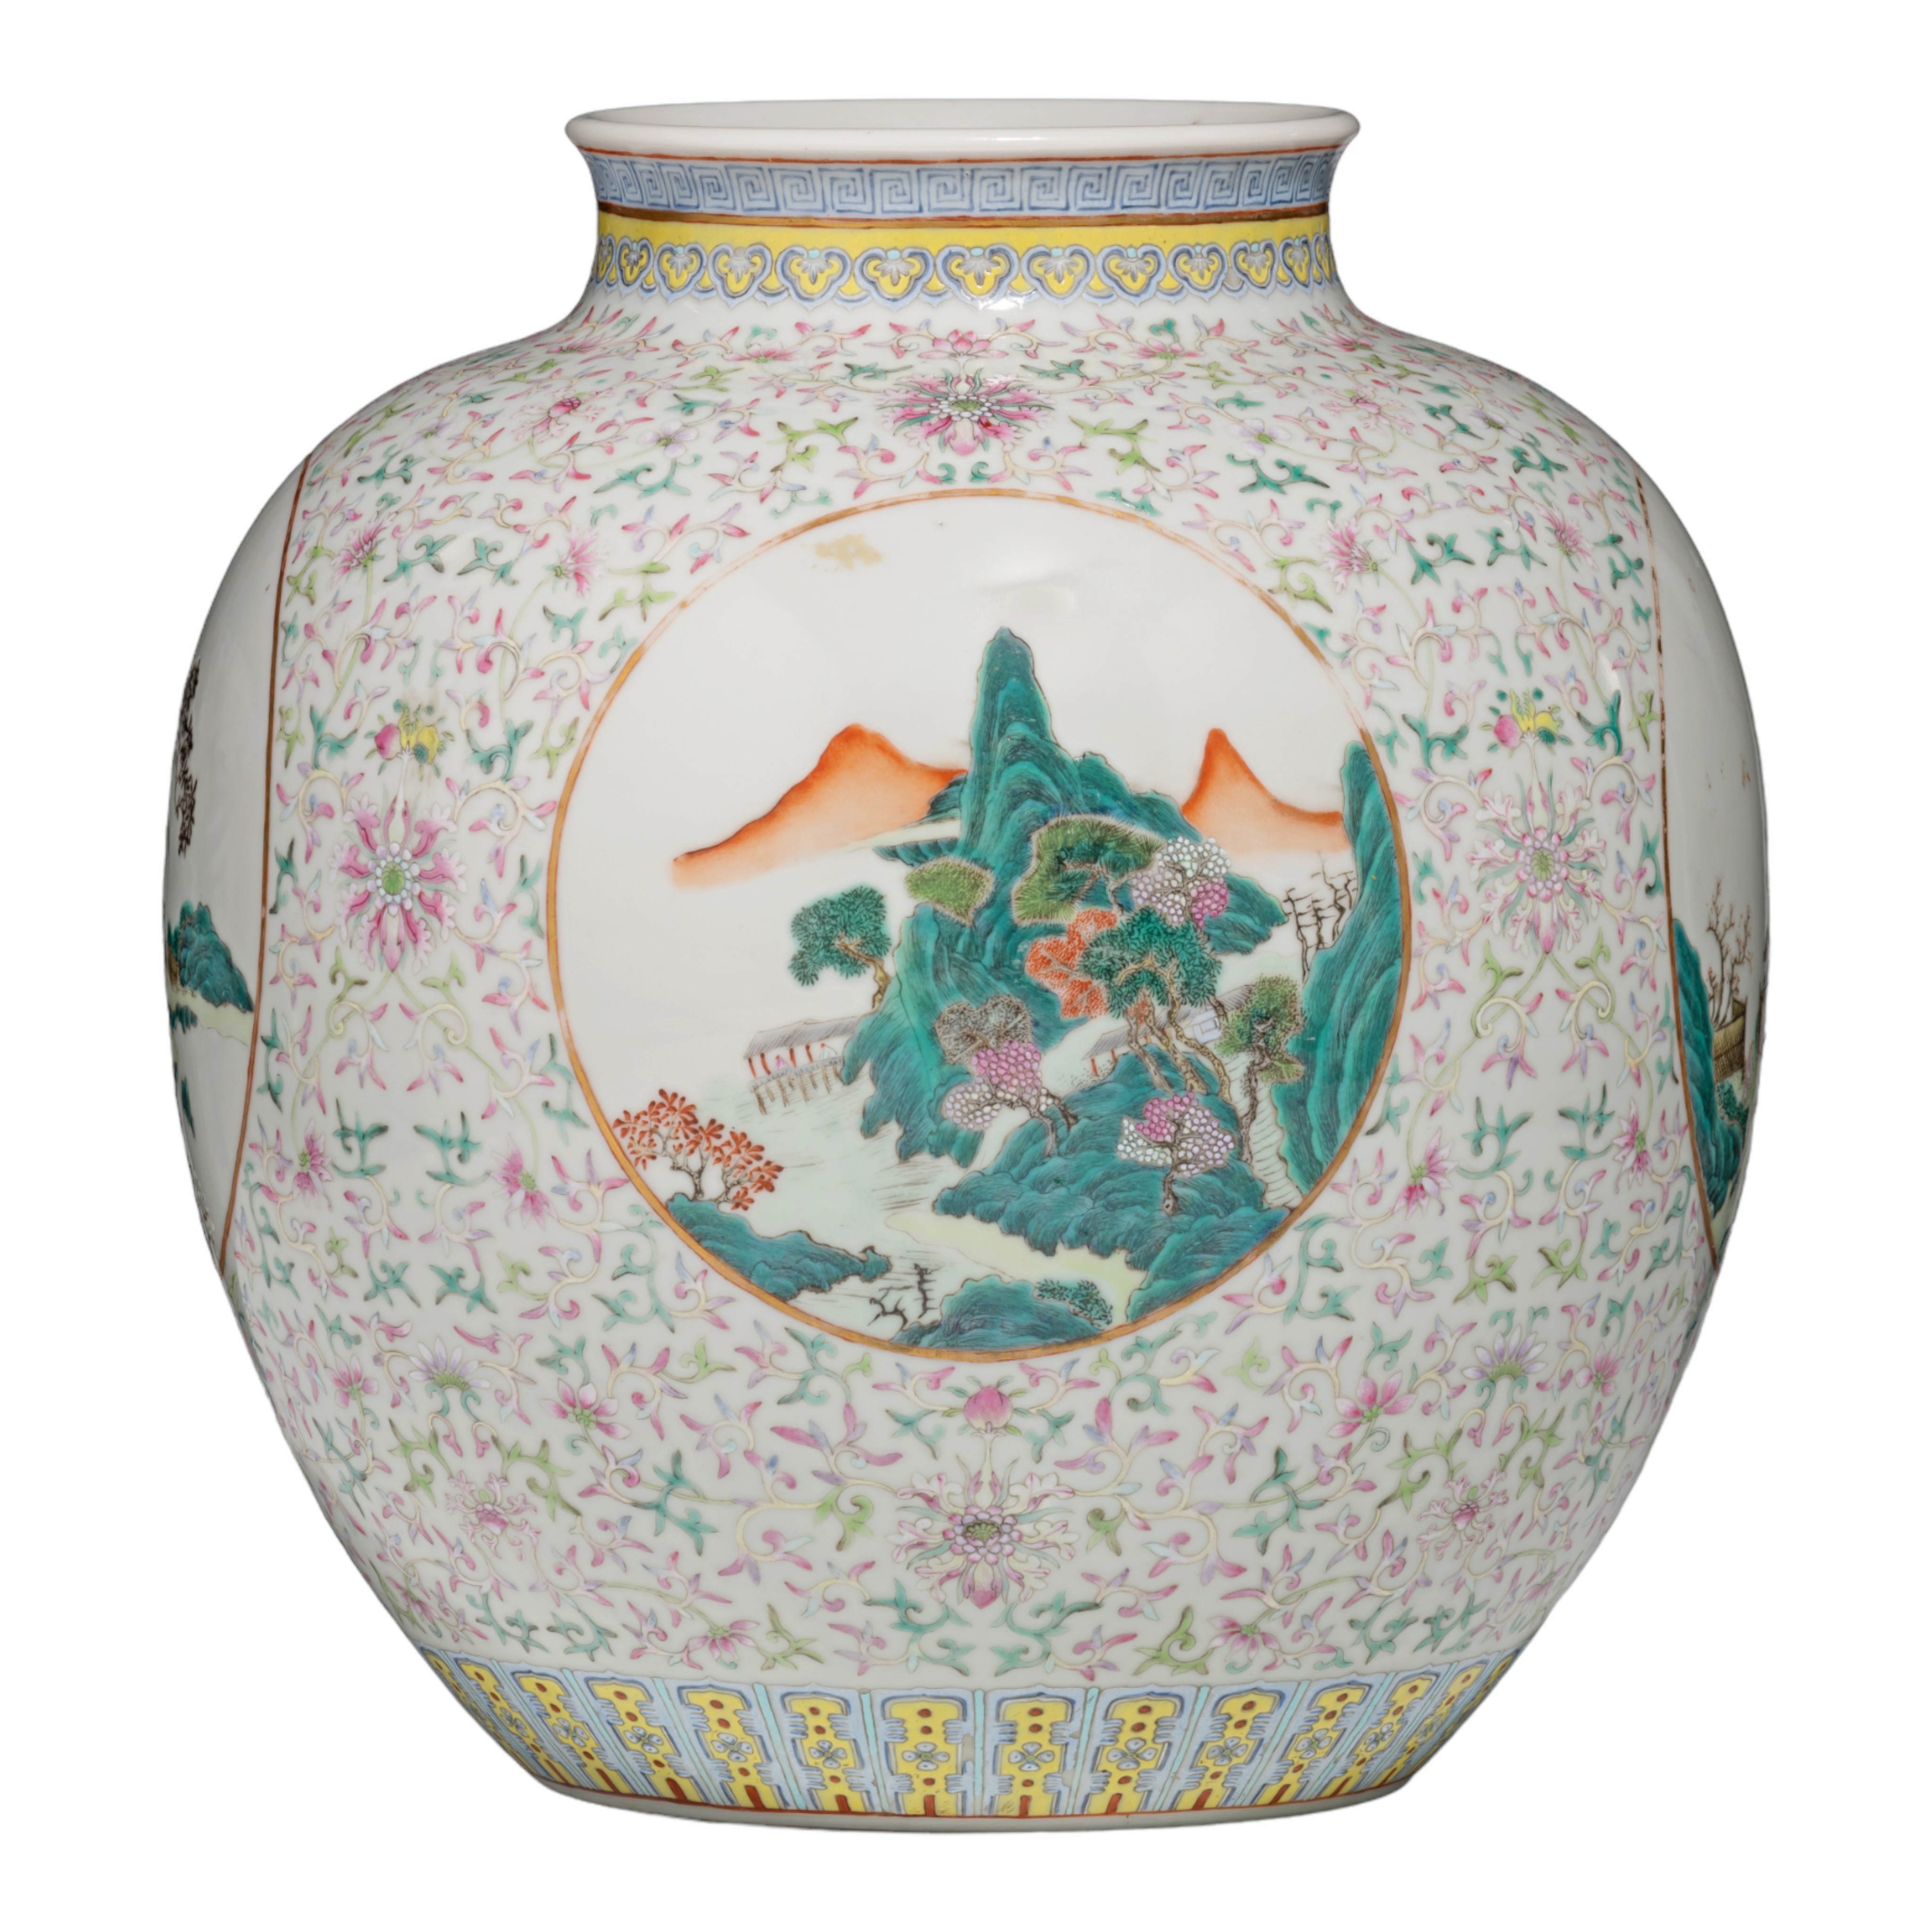 A Chinese famille rose 'Lotus scroll' zun vase, with a Qianlong mark, 19thC, H 25 - ø 23 cm